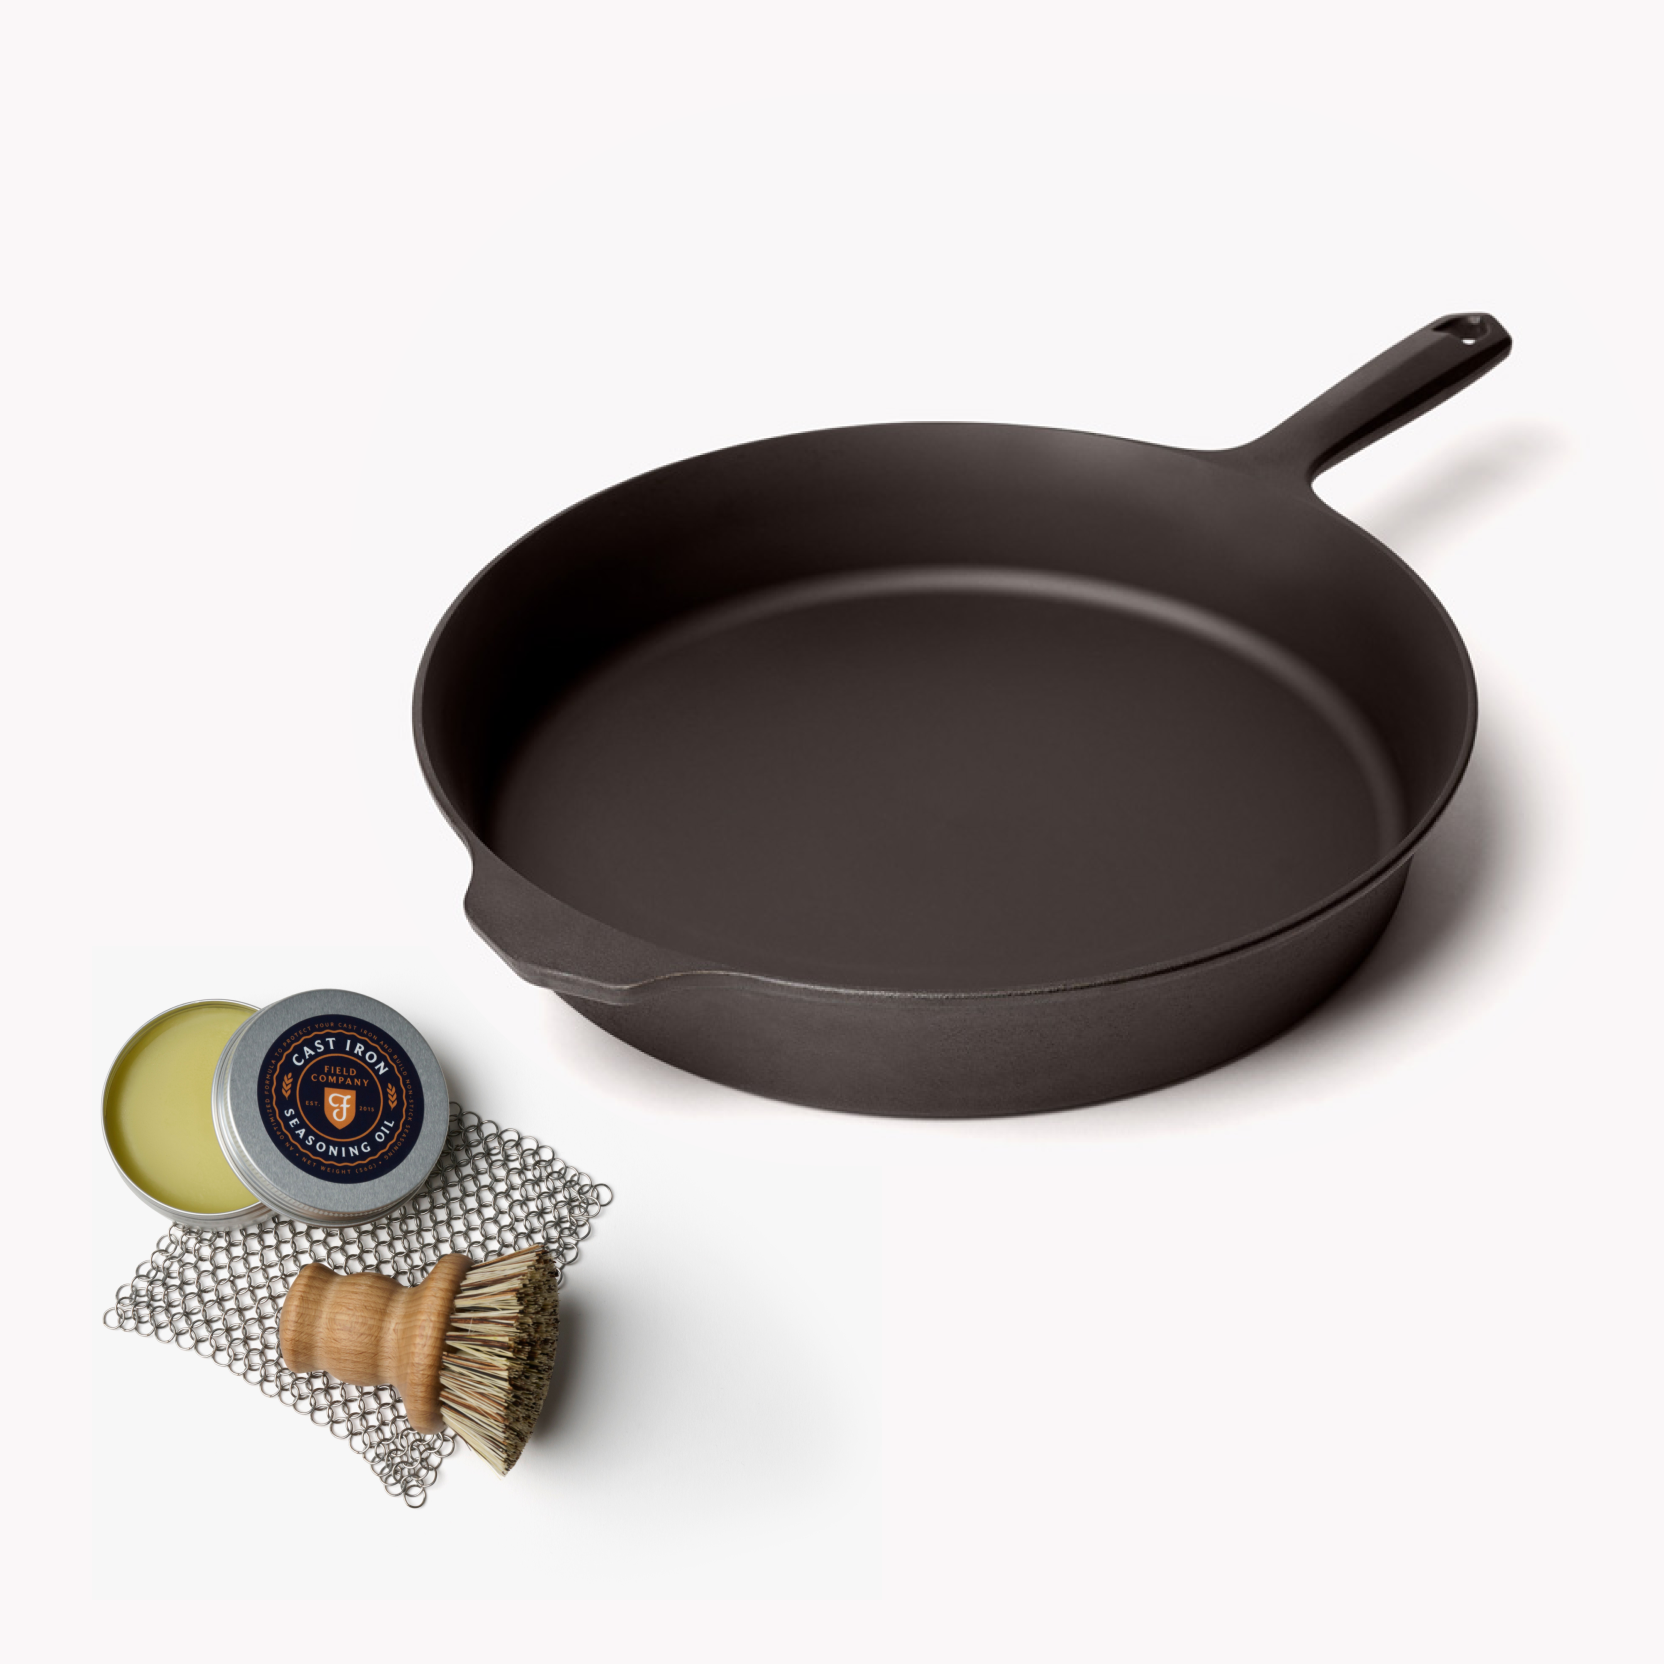 Field Company Cast-Iron Skillet Review 2023 - Forbes Vetted